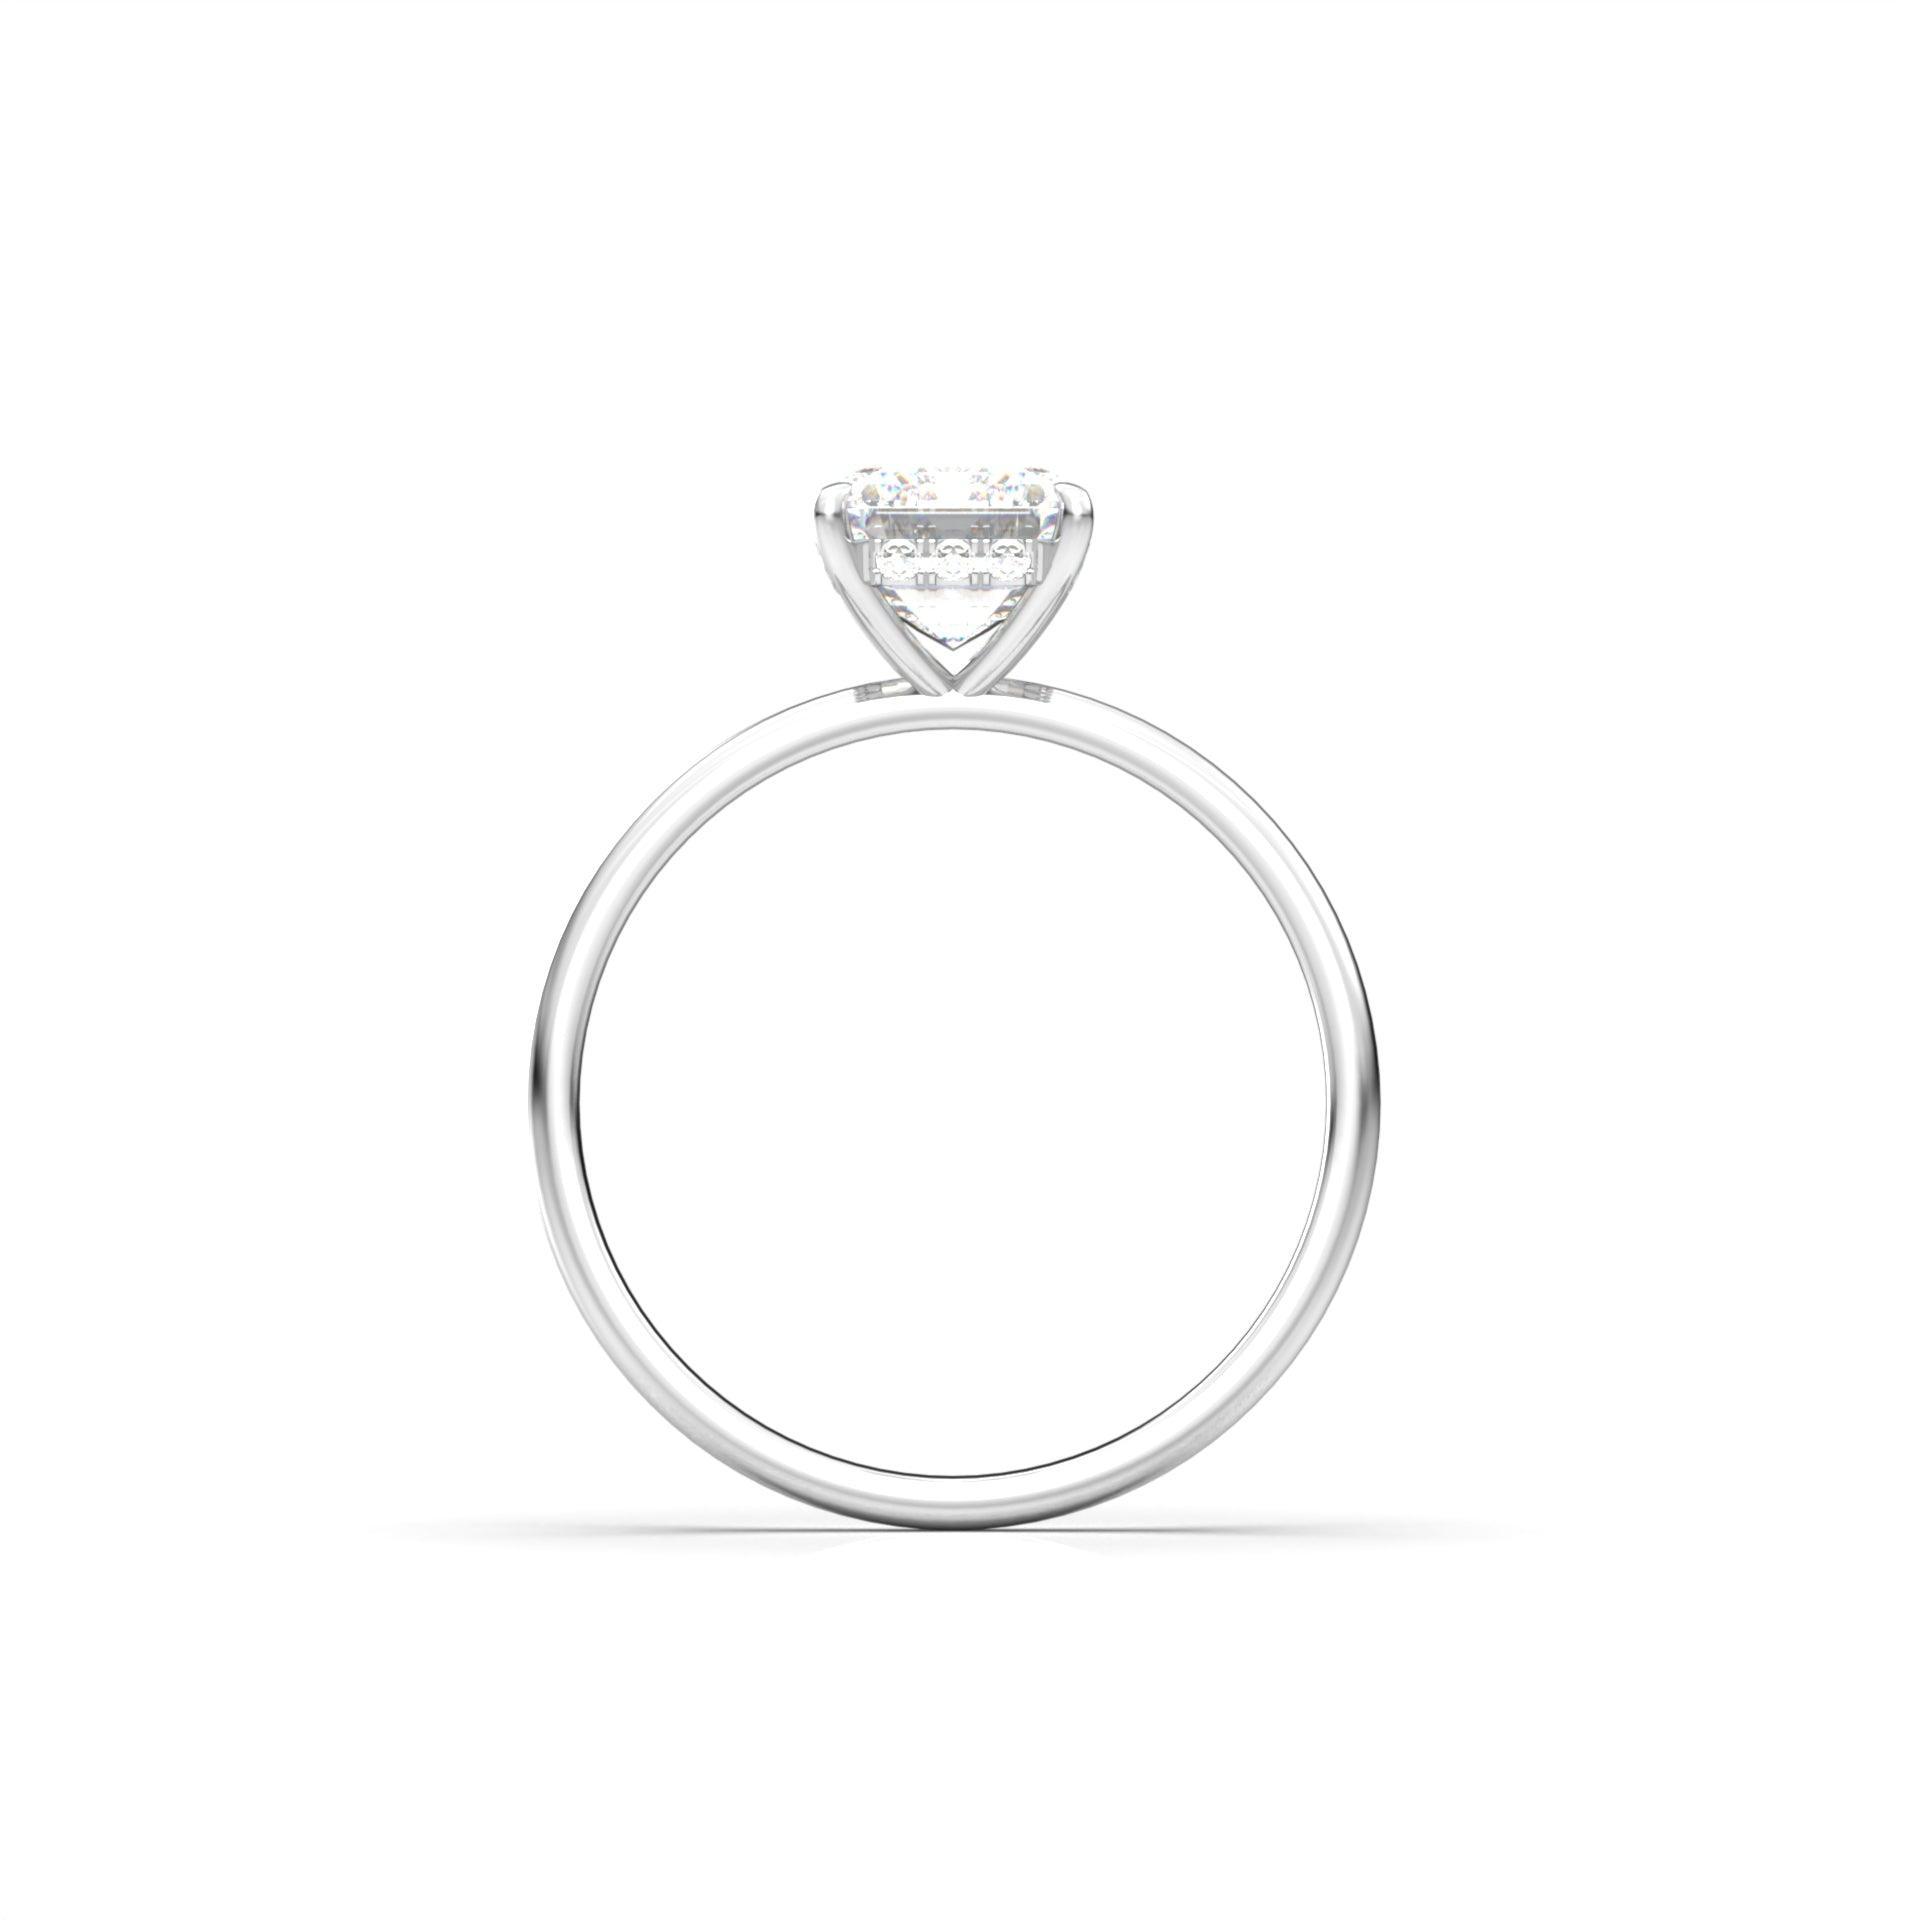 Emerald Cut Solitaire 4 Claw With Hidden Halo - moissaniteengagementrings